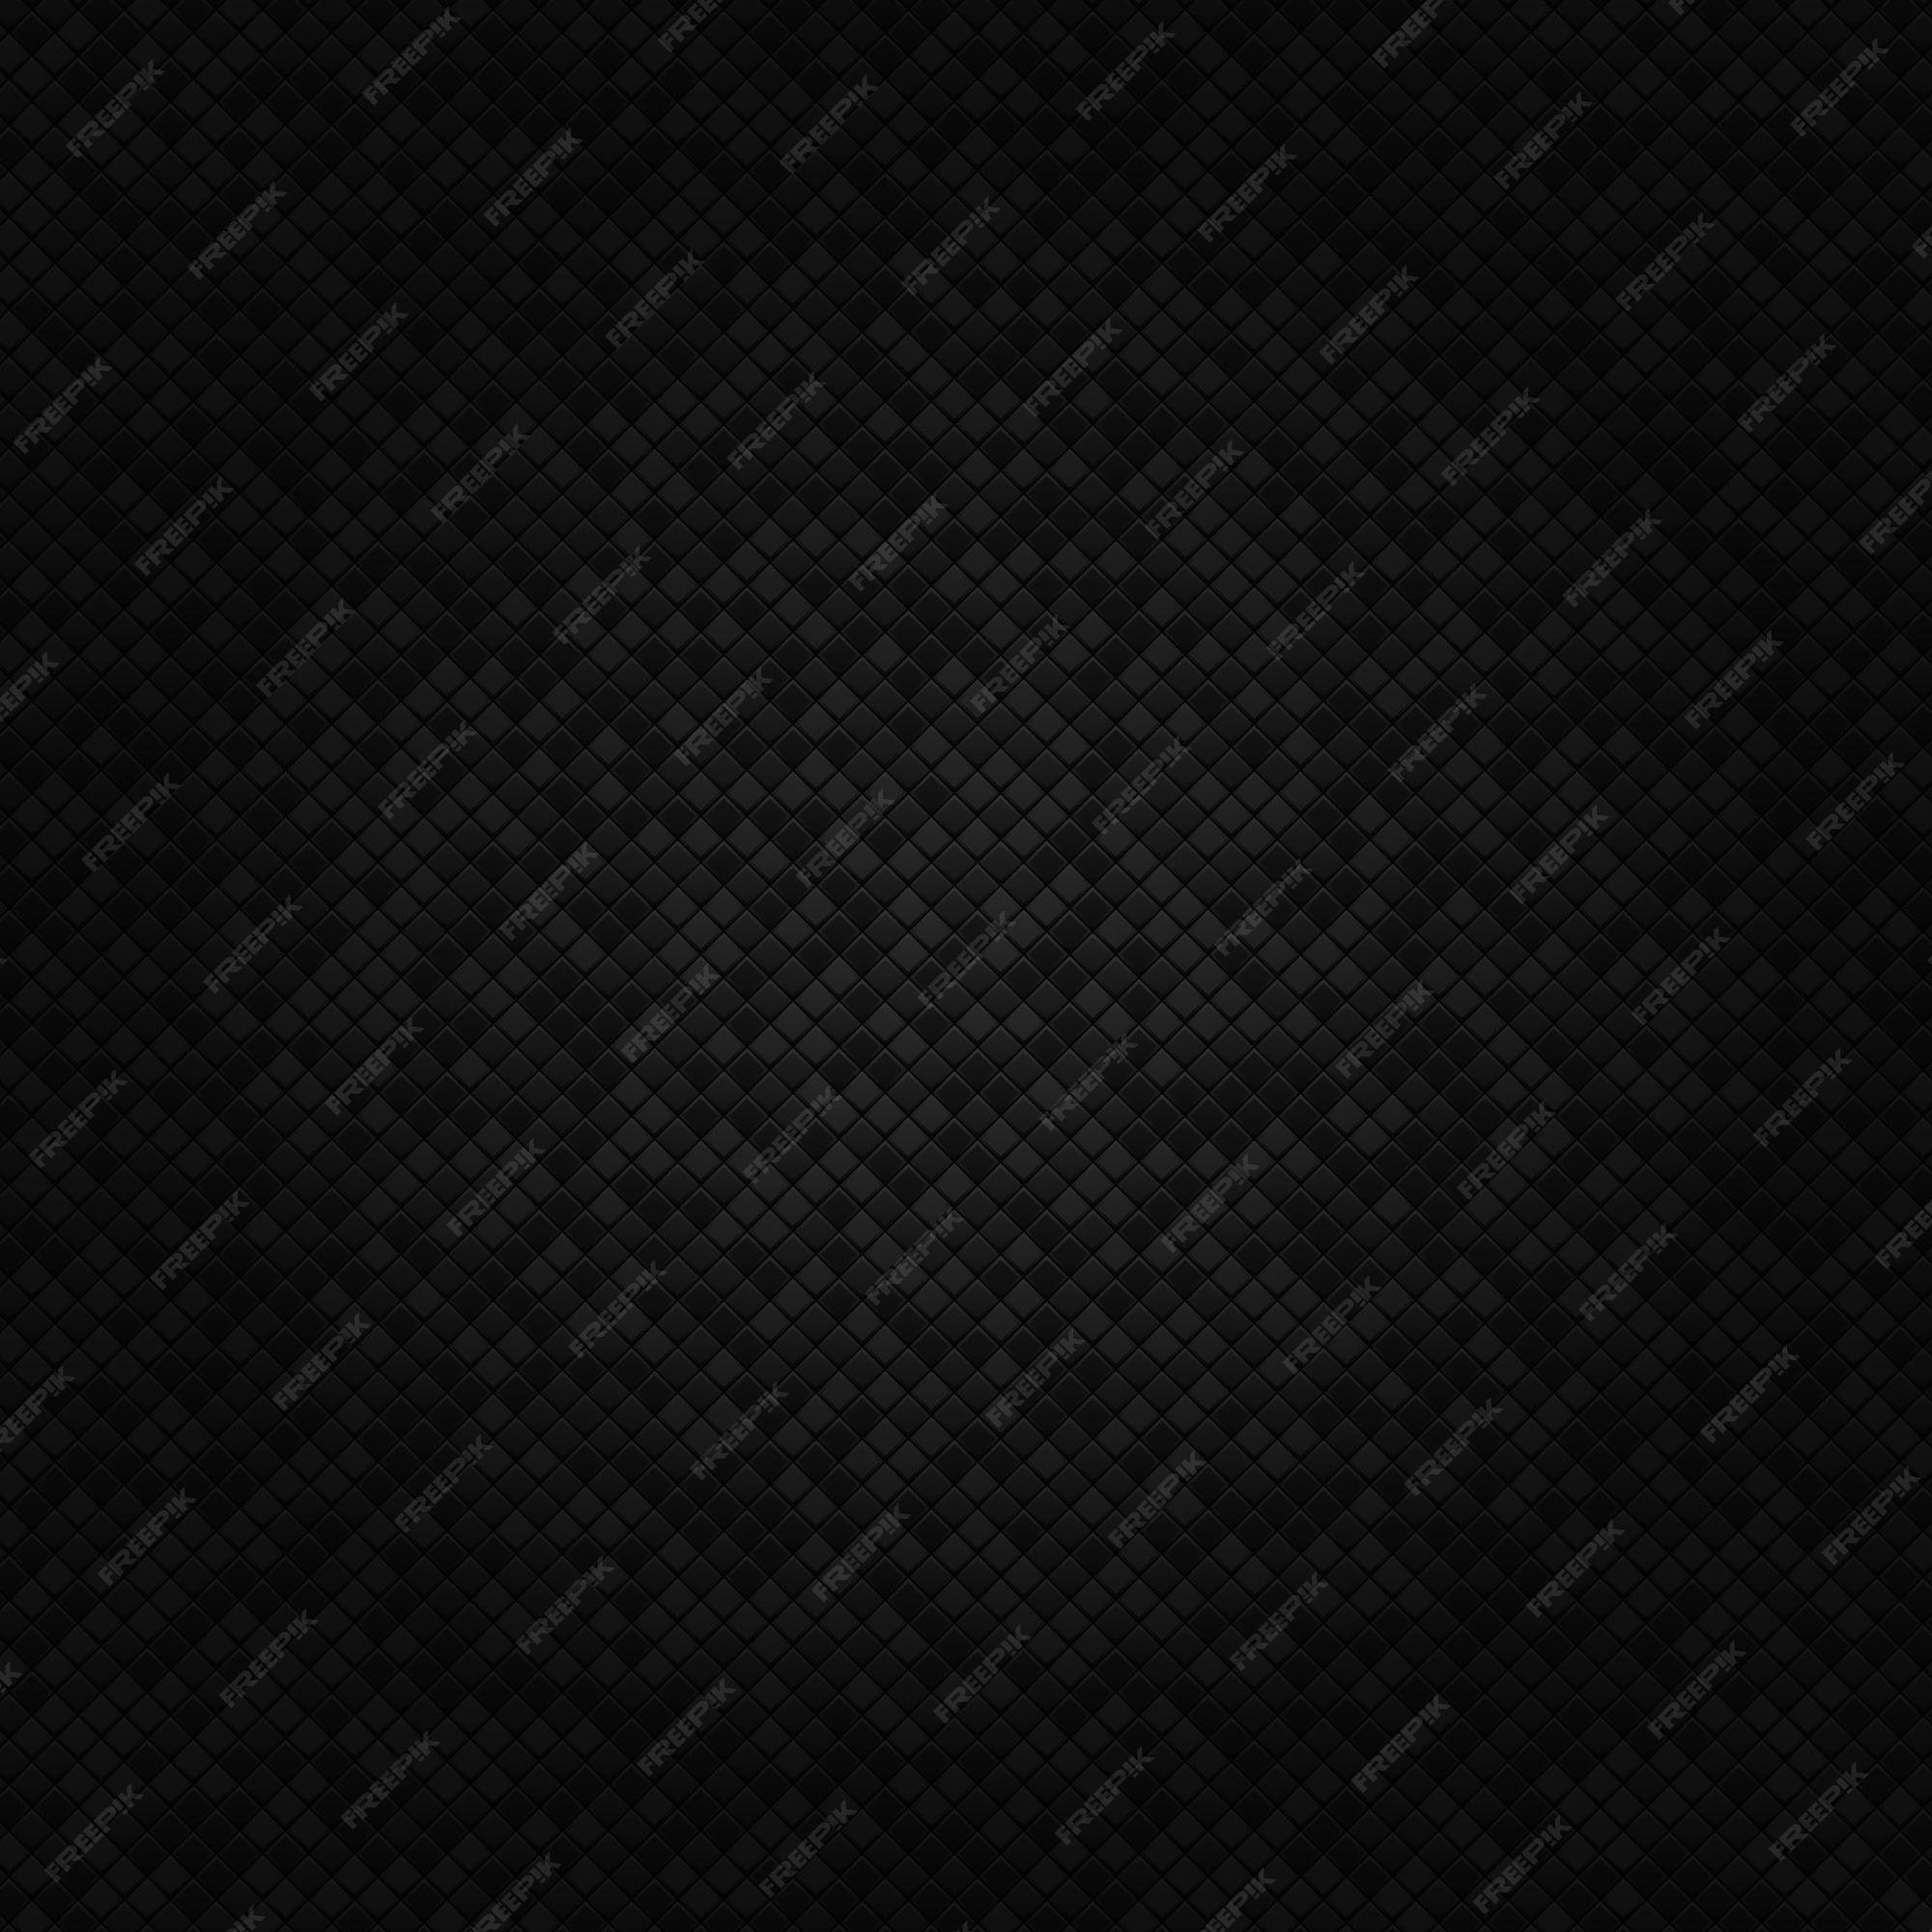 Premium Vector | Black abstract geometric background from small ...